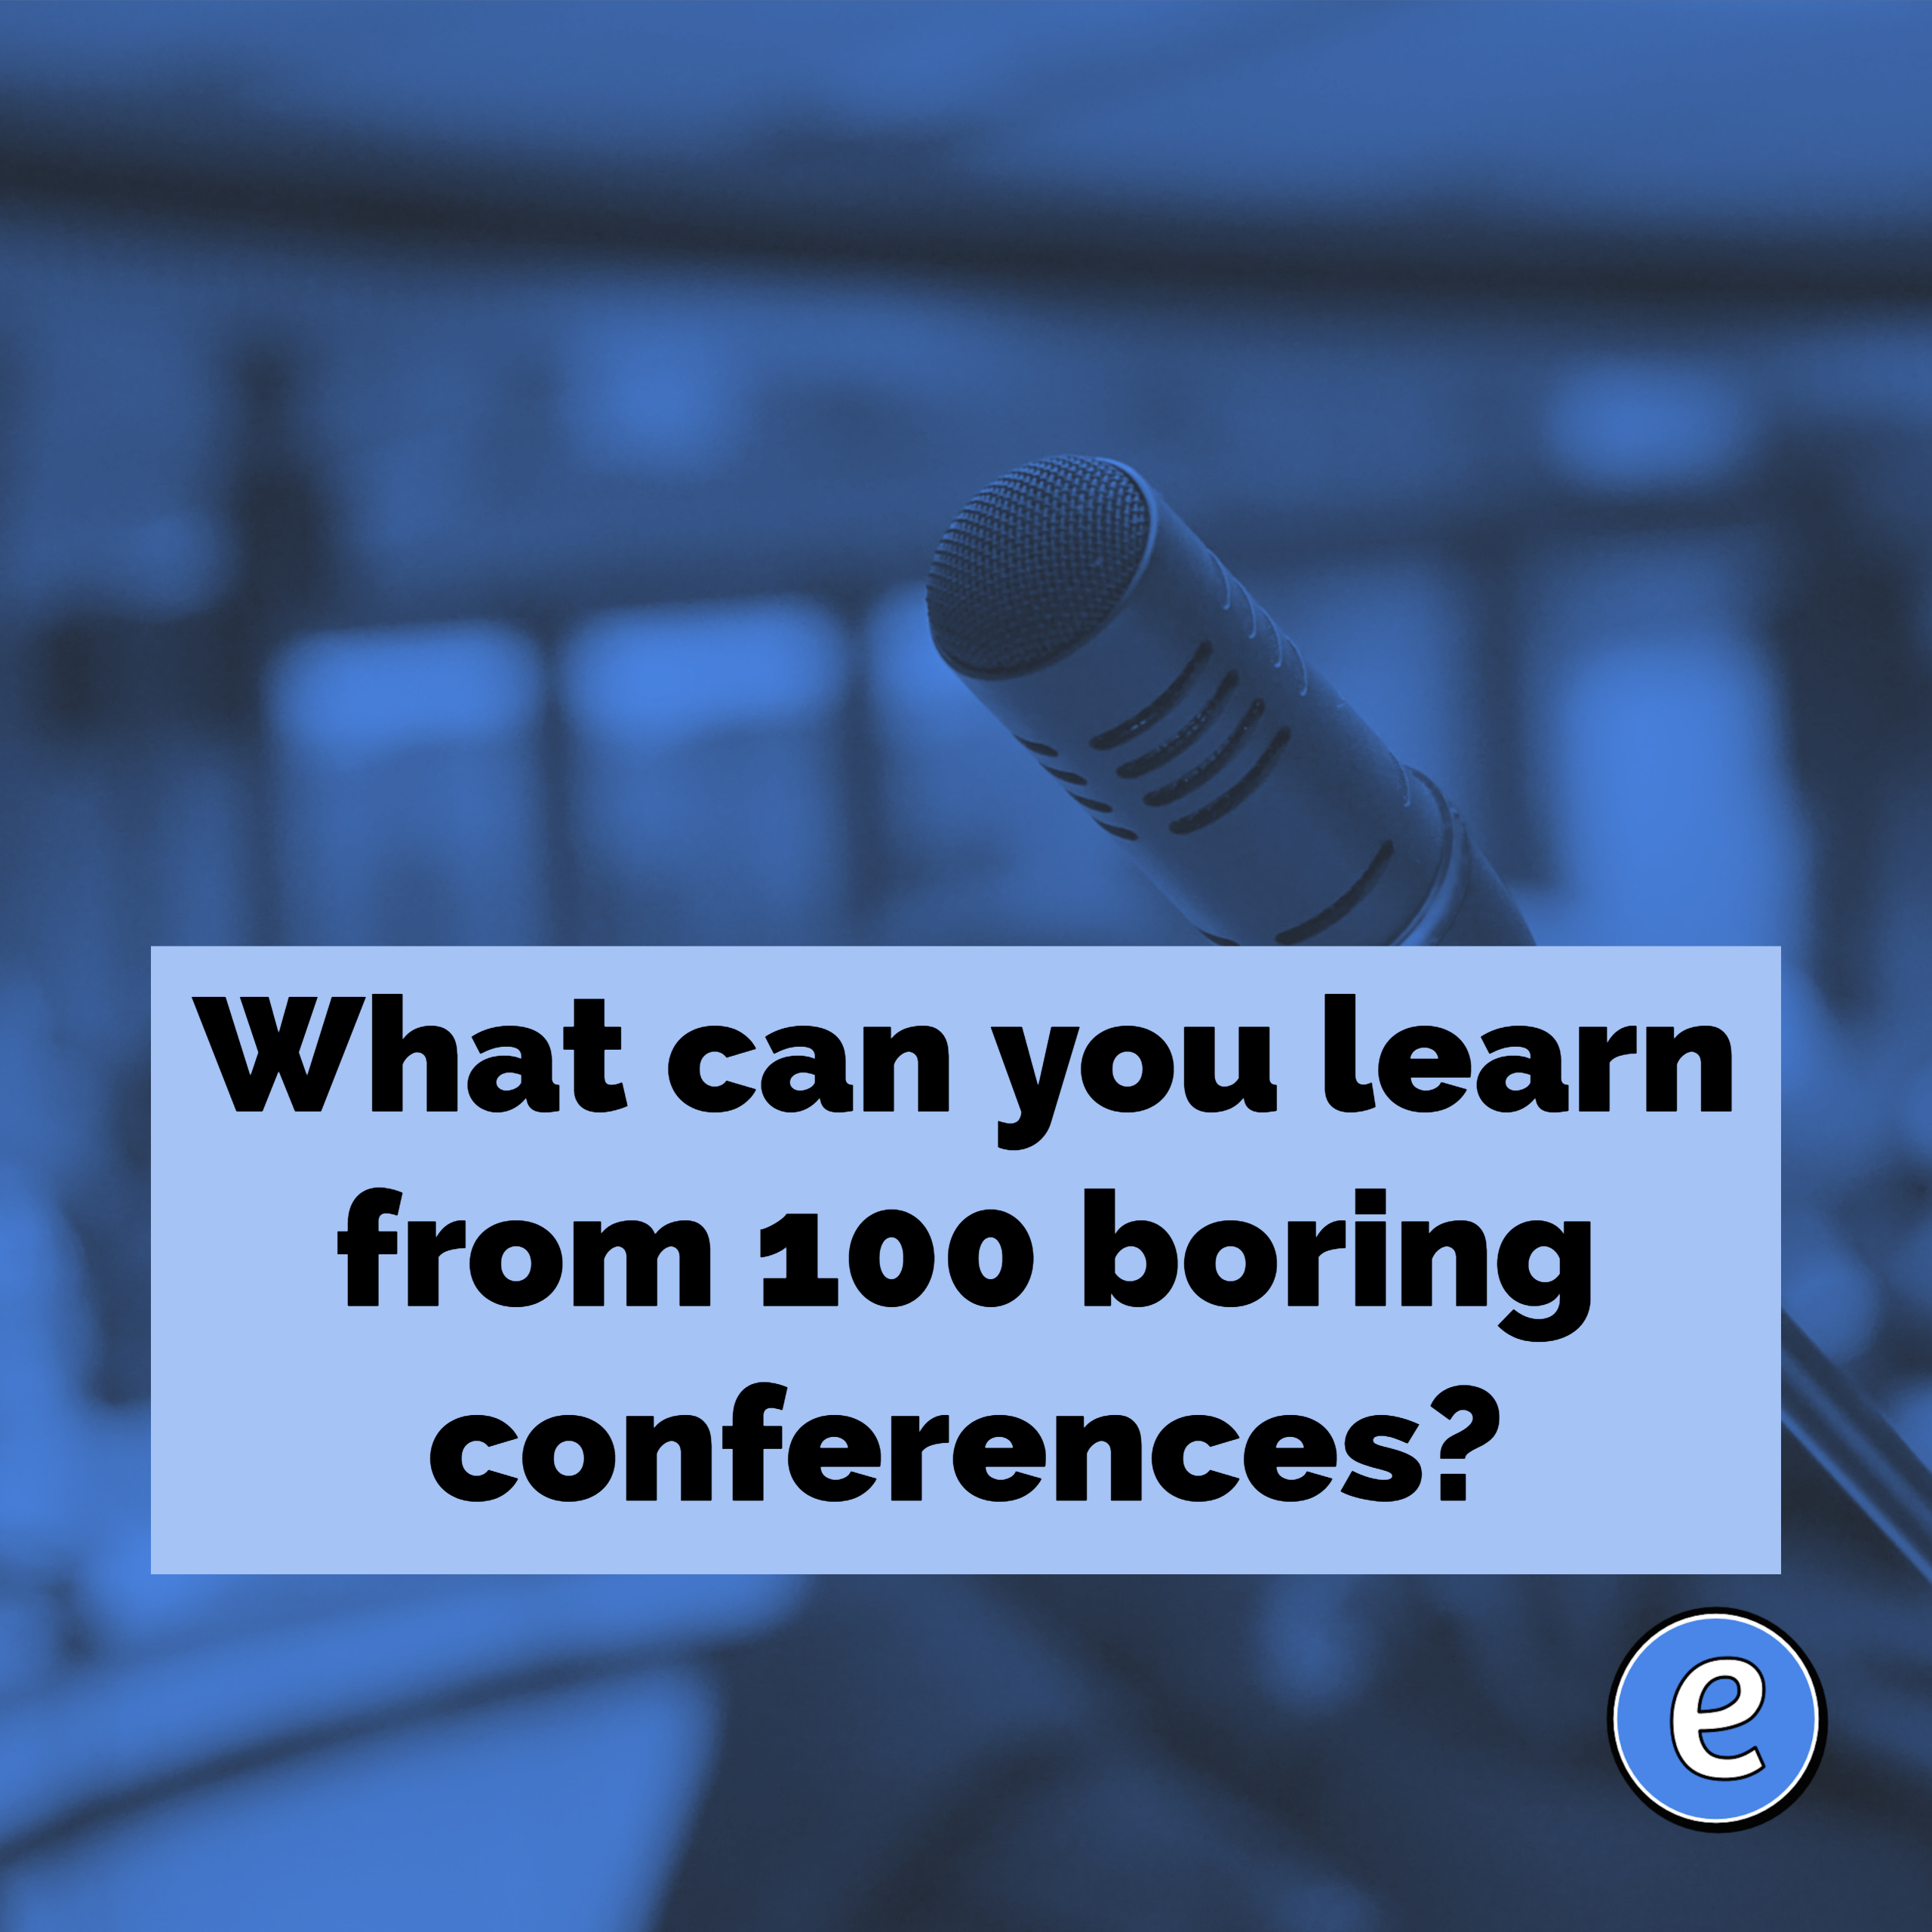 What can you learn from 100 boring conferences?